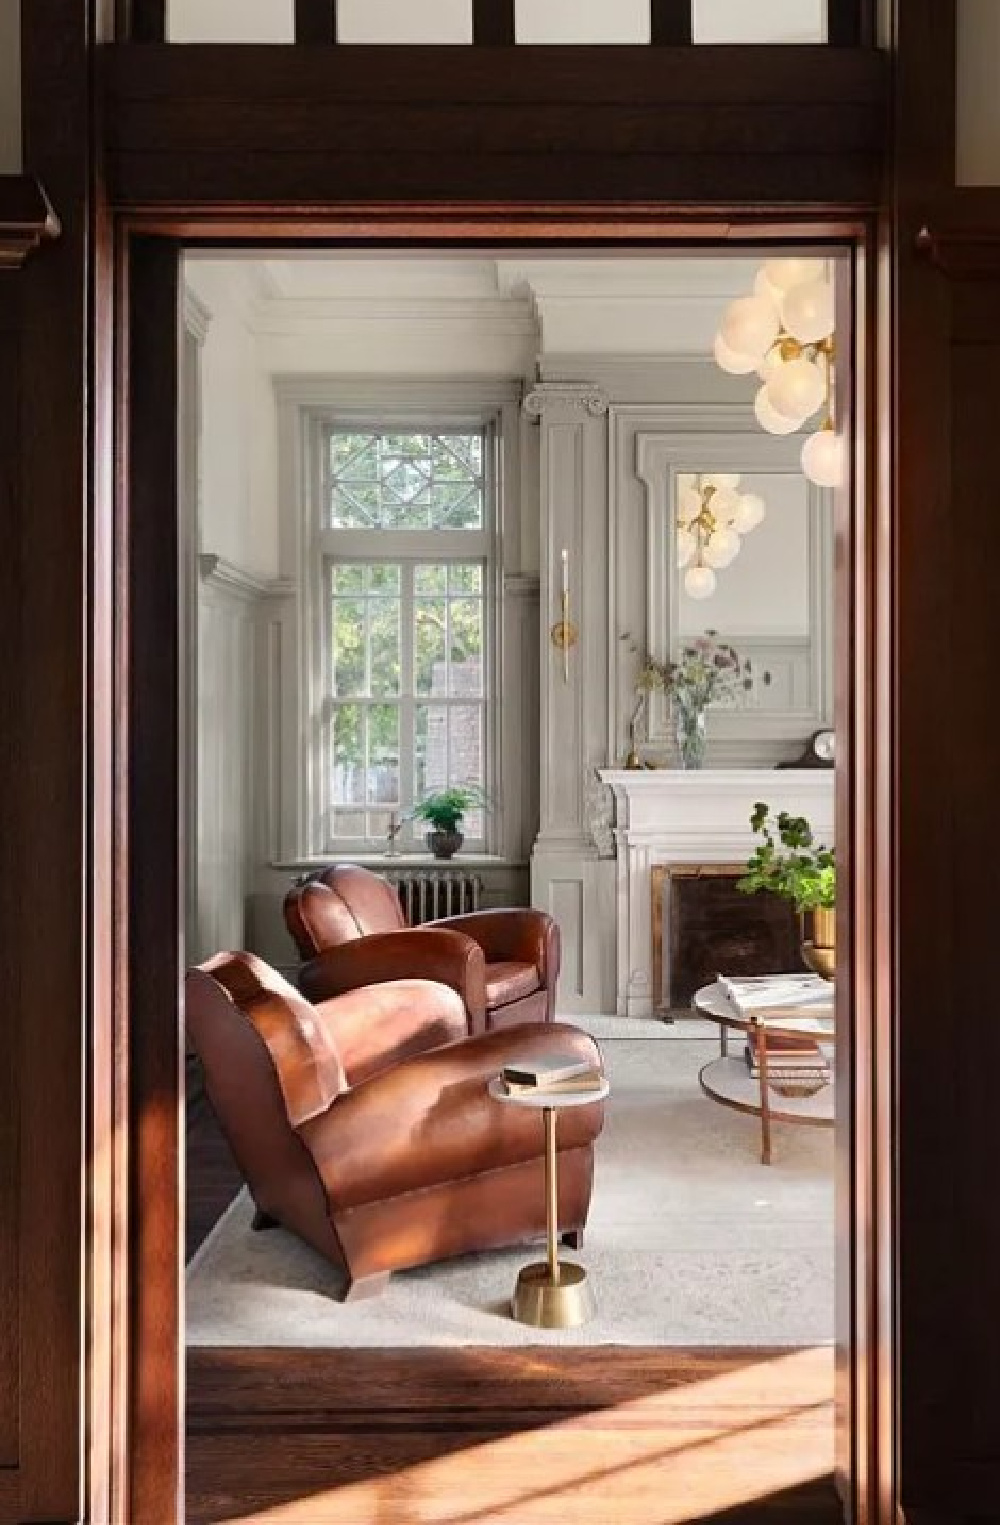 Drawing Room (a soft French Gray paint color by Kilz - Magnolia's Castle Collection by Joanna Gaines) on paneling in Fixer Upper The Castle (Waco, TX). #thecastle #fixerupperthecastle